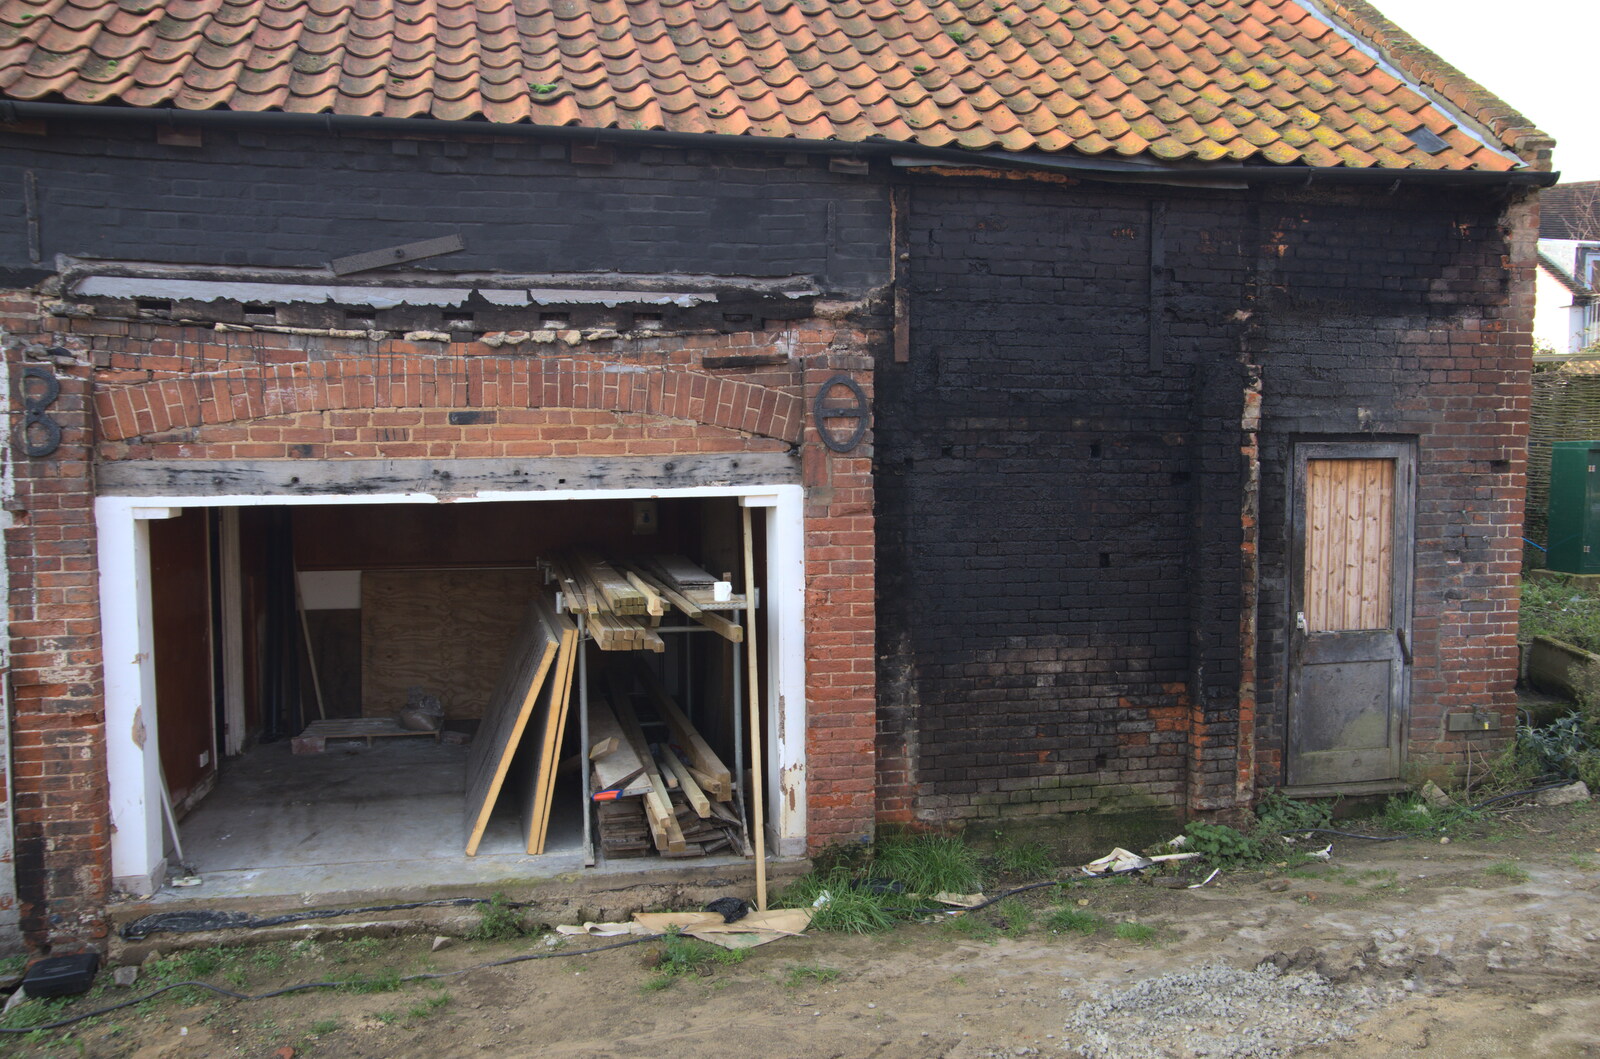 A Trip to Orford, Suffolk - 25th January 2020: The remains of the former Pinney's smokehouse